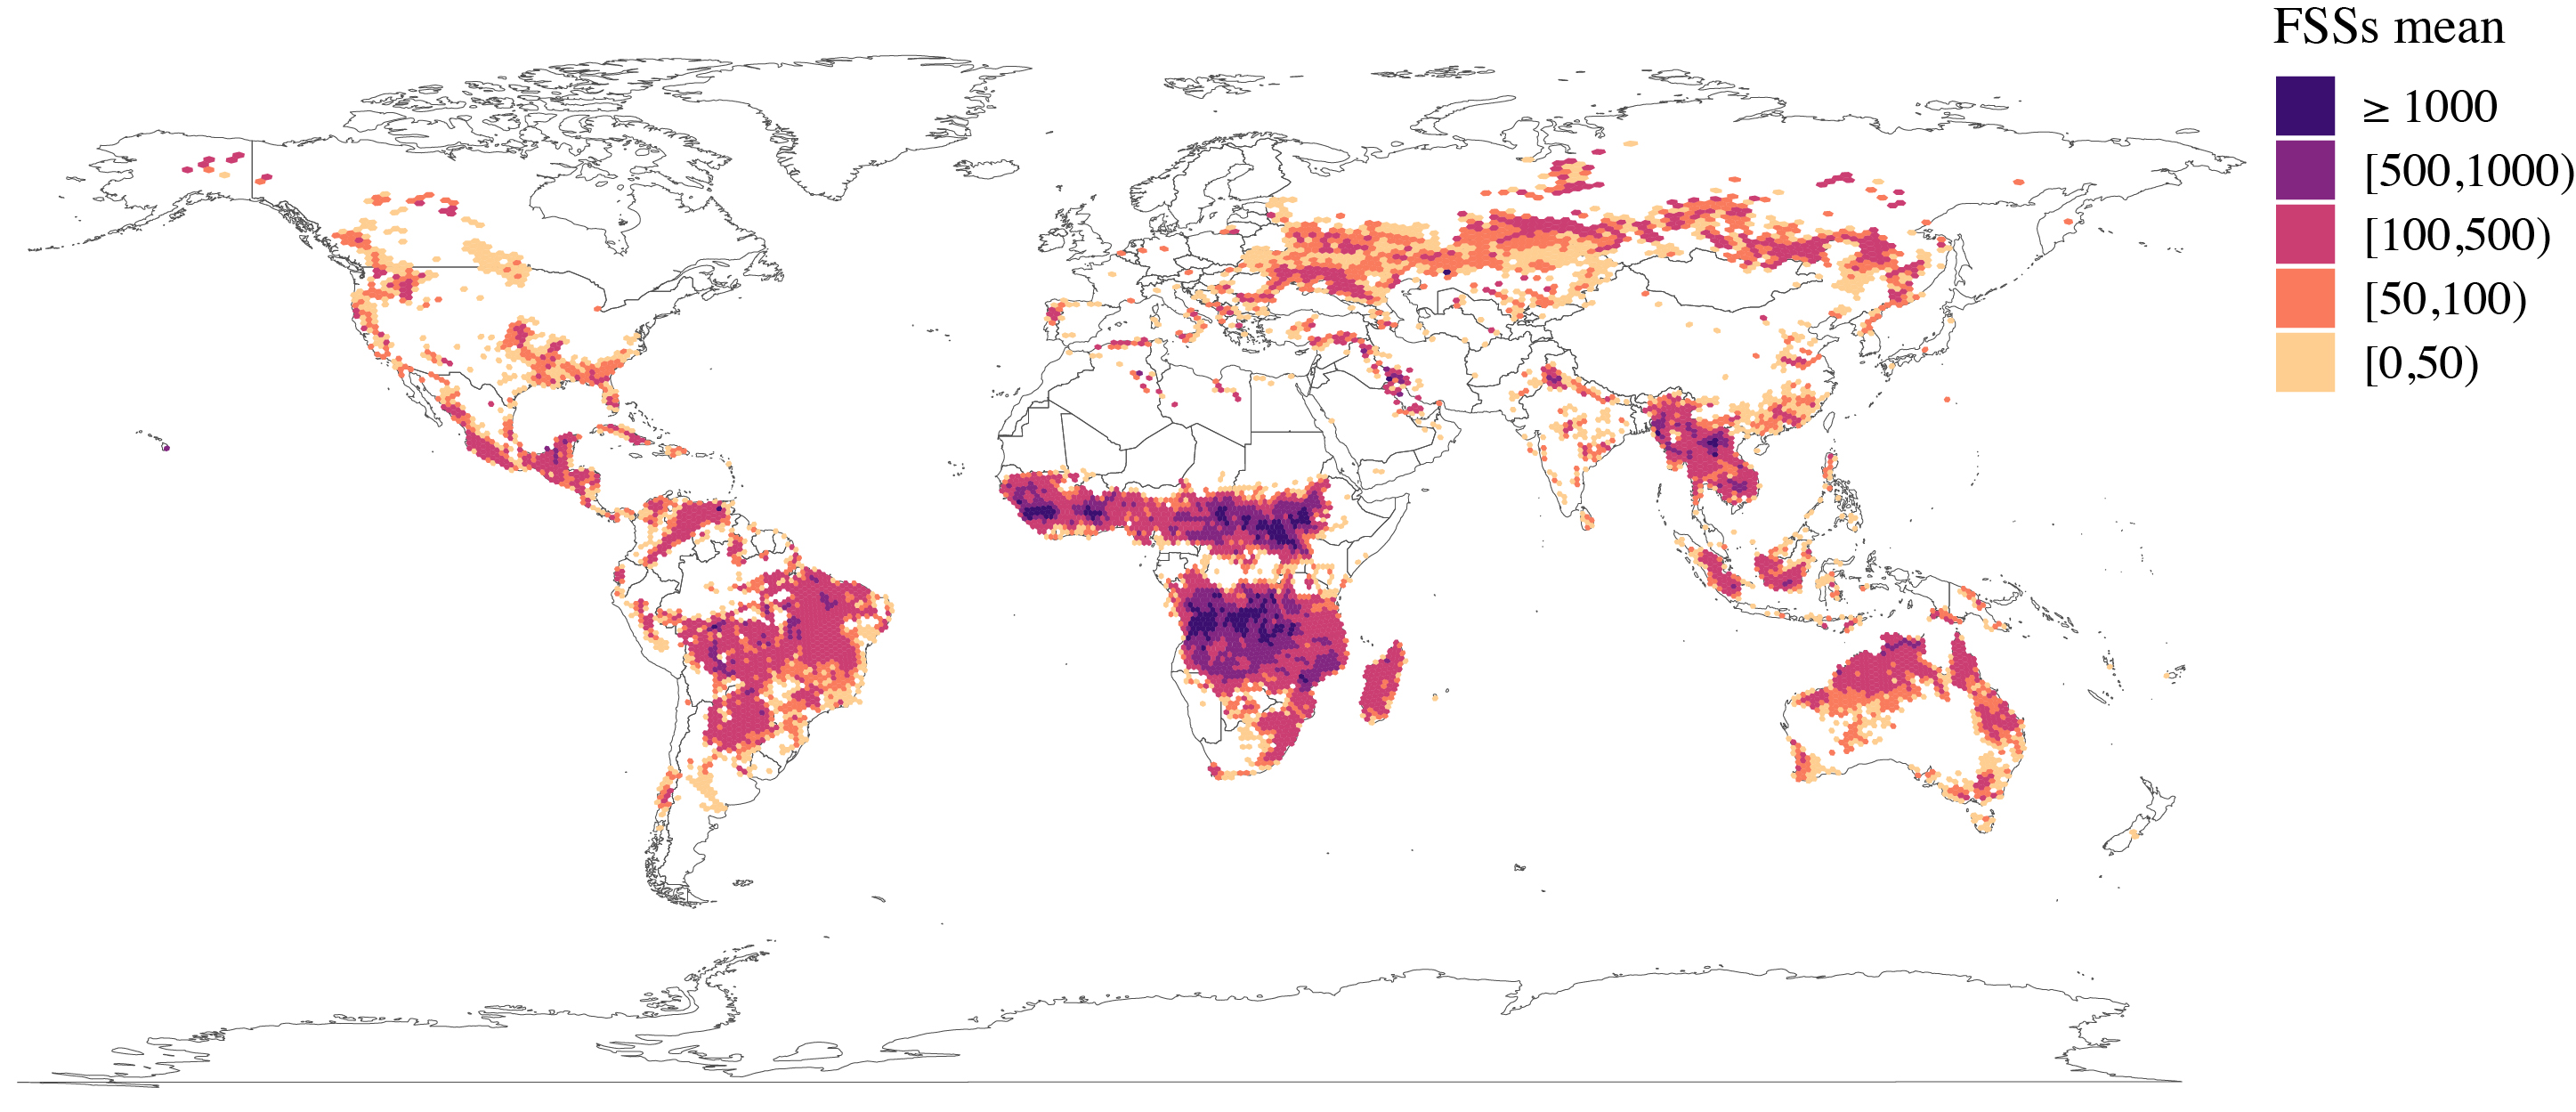 Climate networks